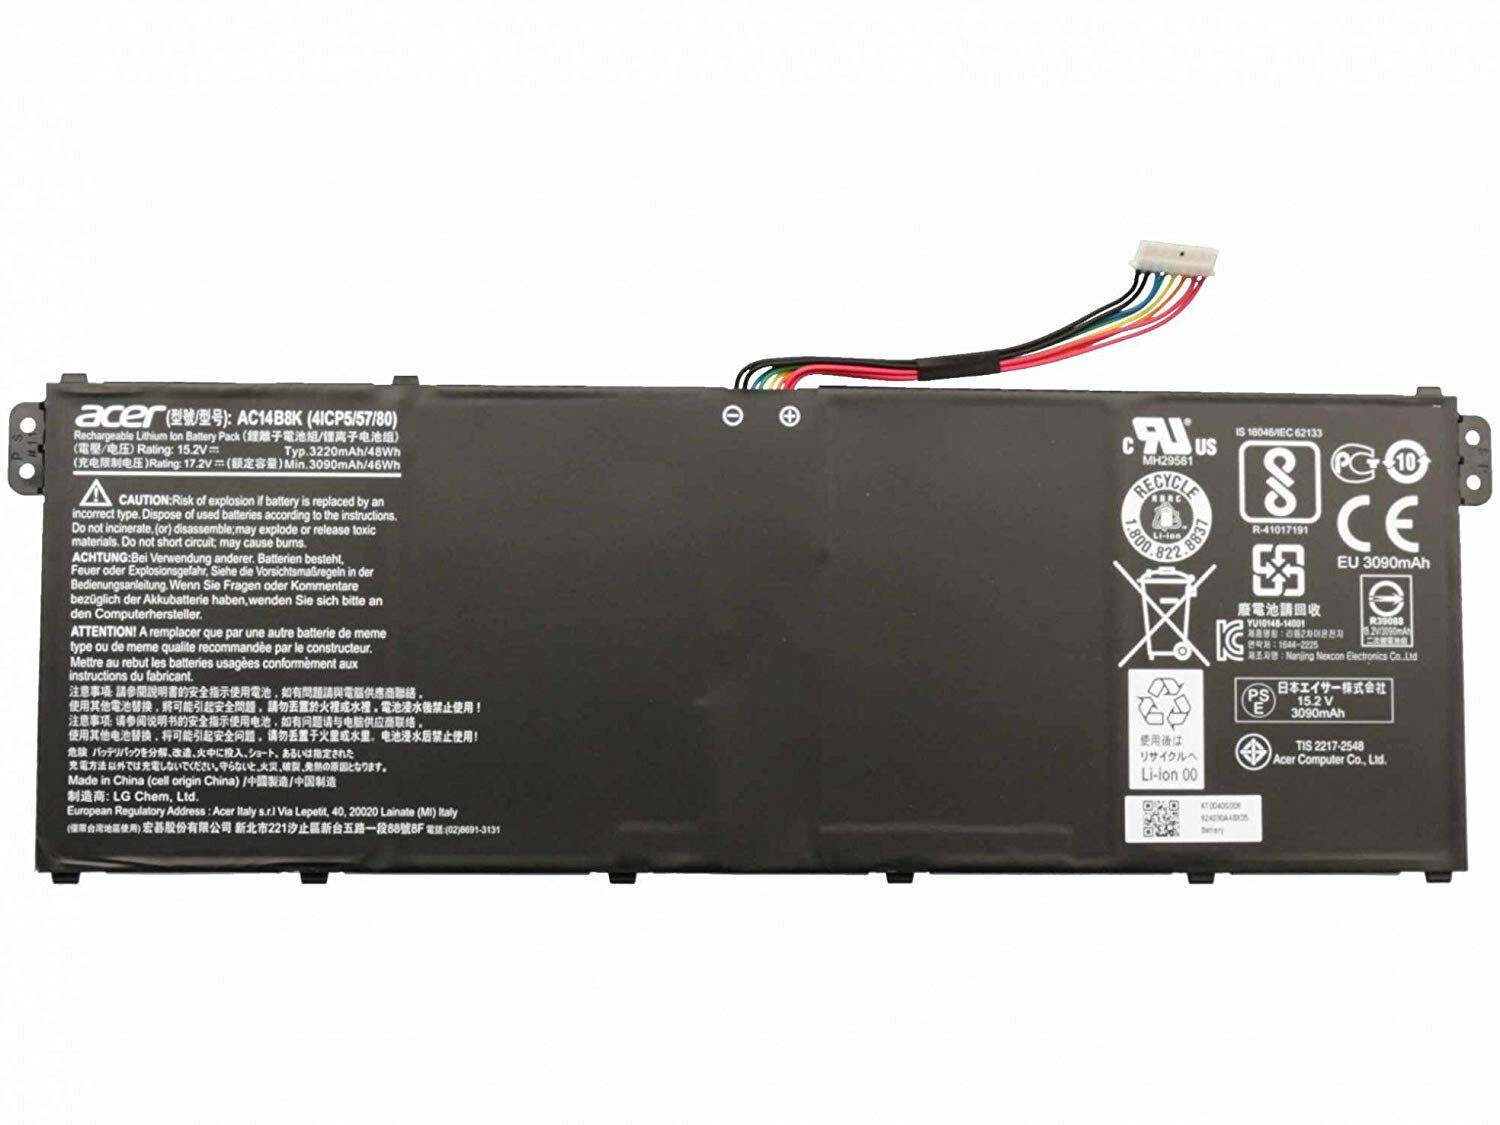 New New Genuine Battery for Acer Nitro 5 AN515-51-75A2 N17C1 AN515-51 Series